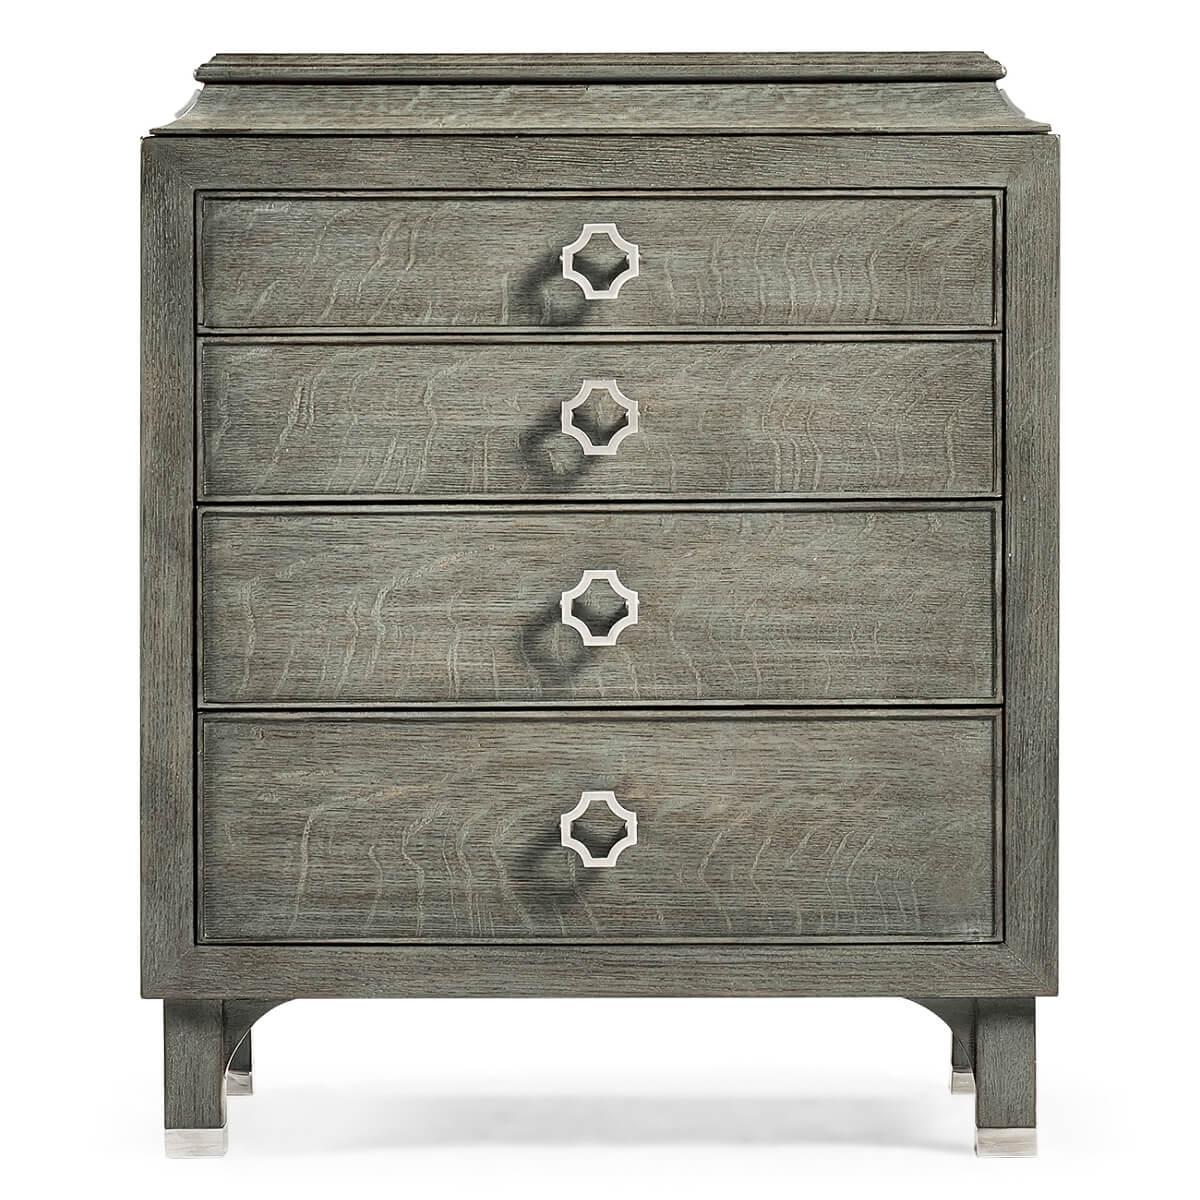 Modern pewter oak nightstands, featuring a small hidden top drawer, with stainless steel handles and caps on the feet. 

Dimensions: 24